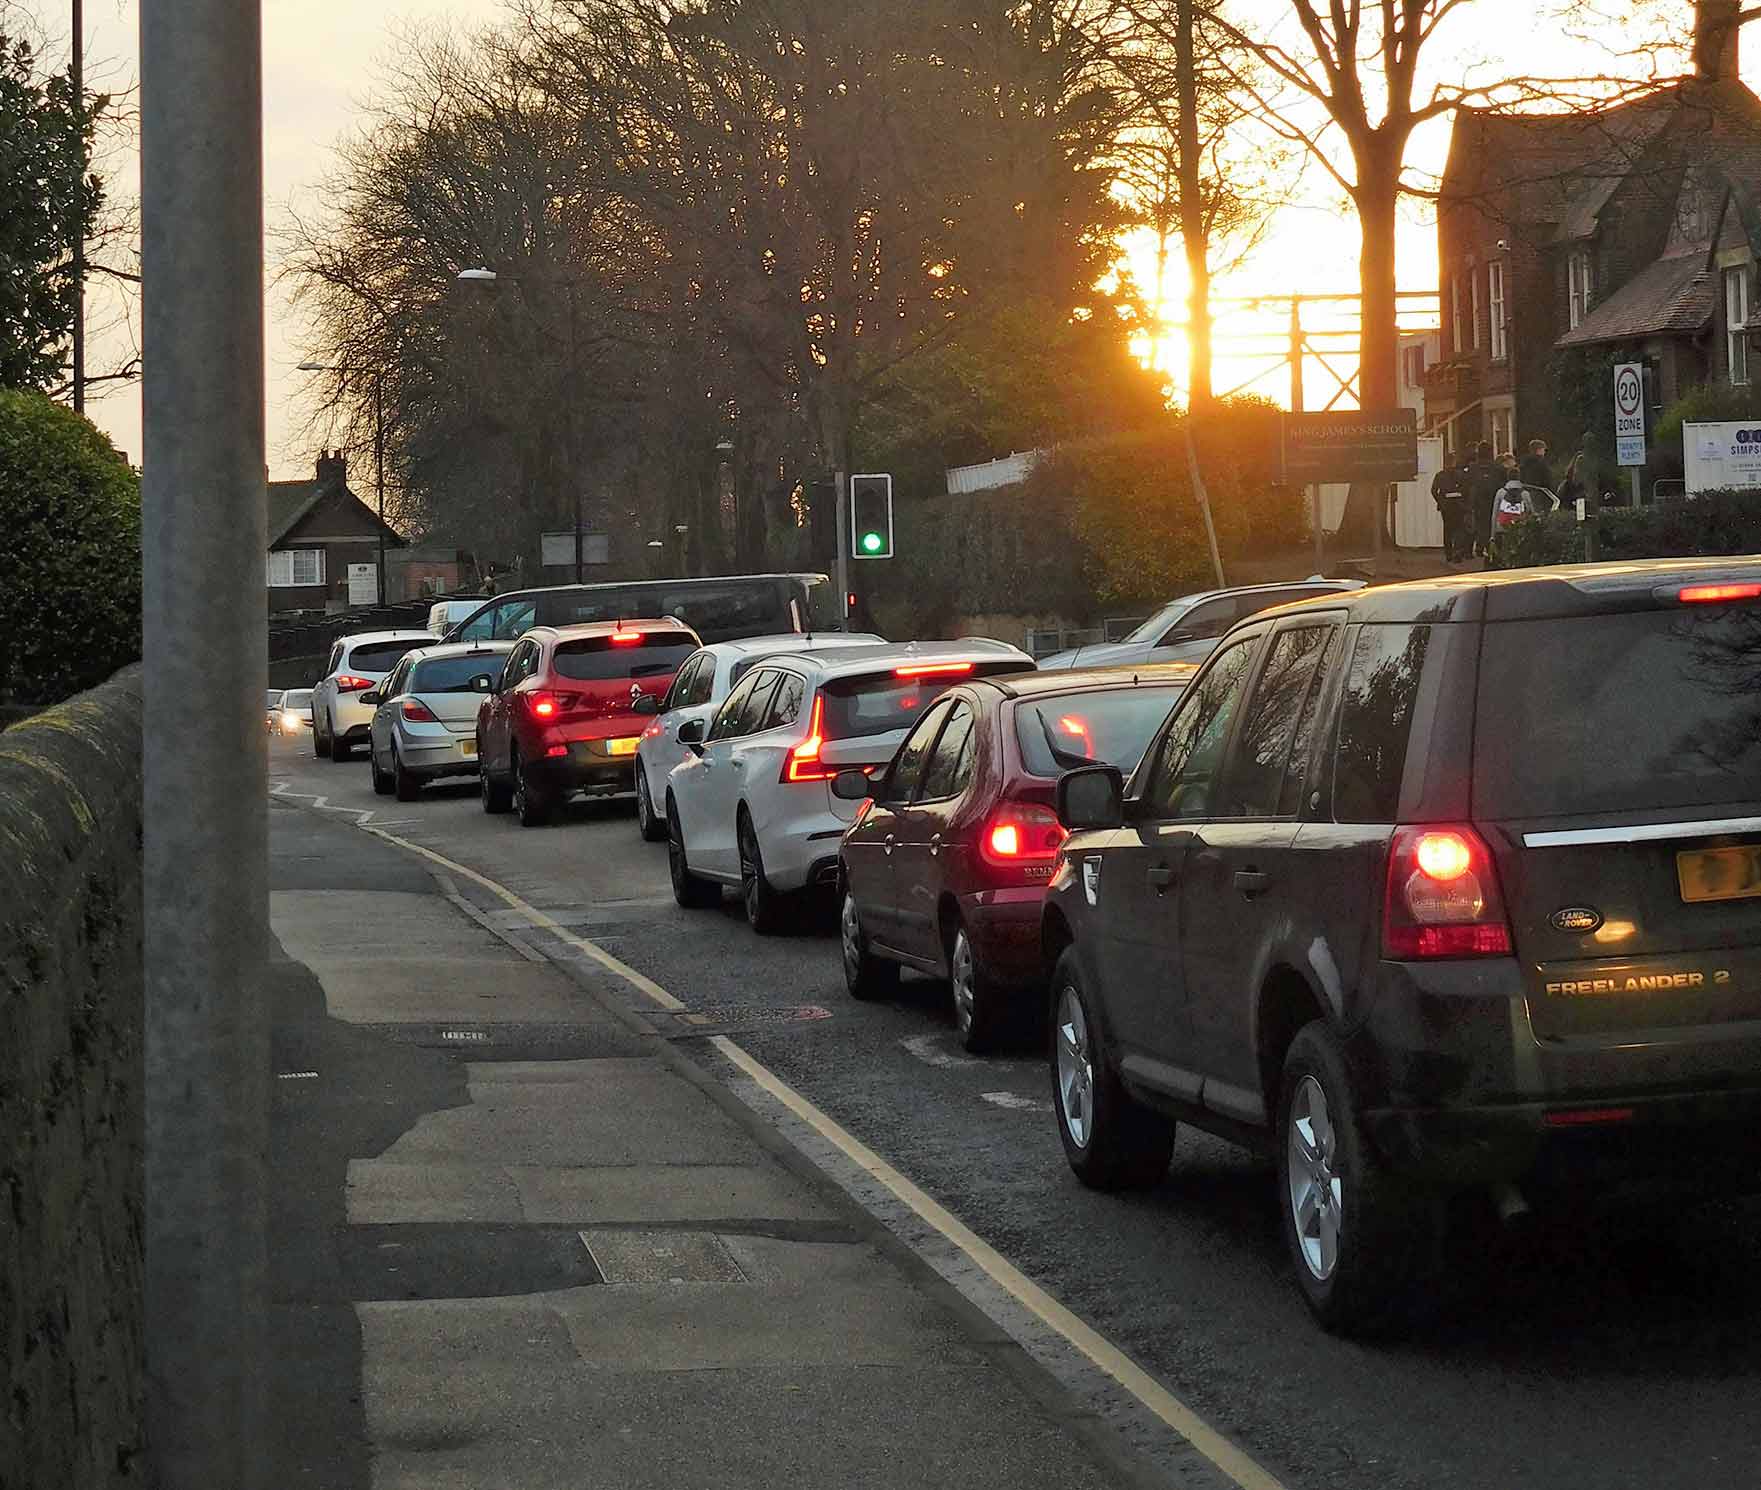 It is hoped that one benefit of the park and stride scheme will be to reduce traffic near King James School at school arrival and departure times